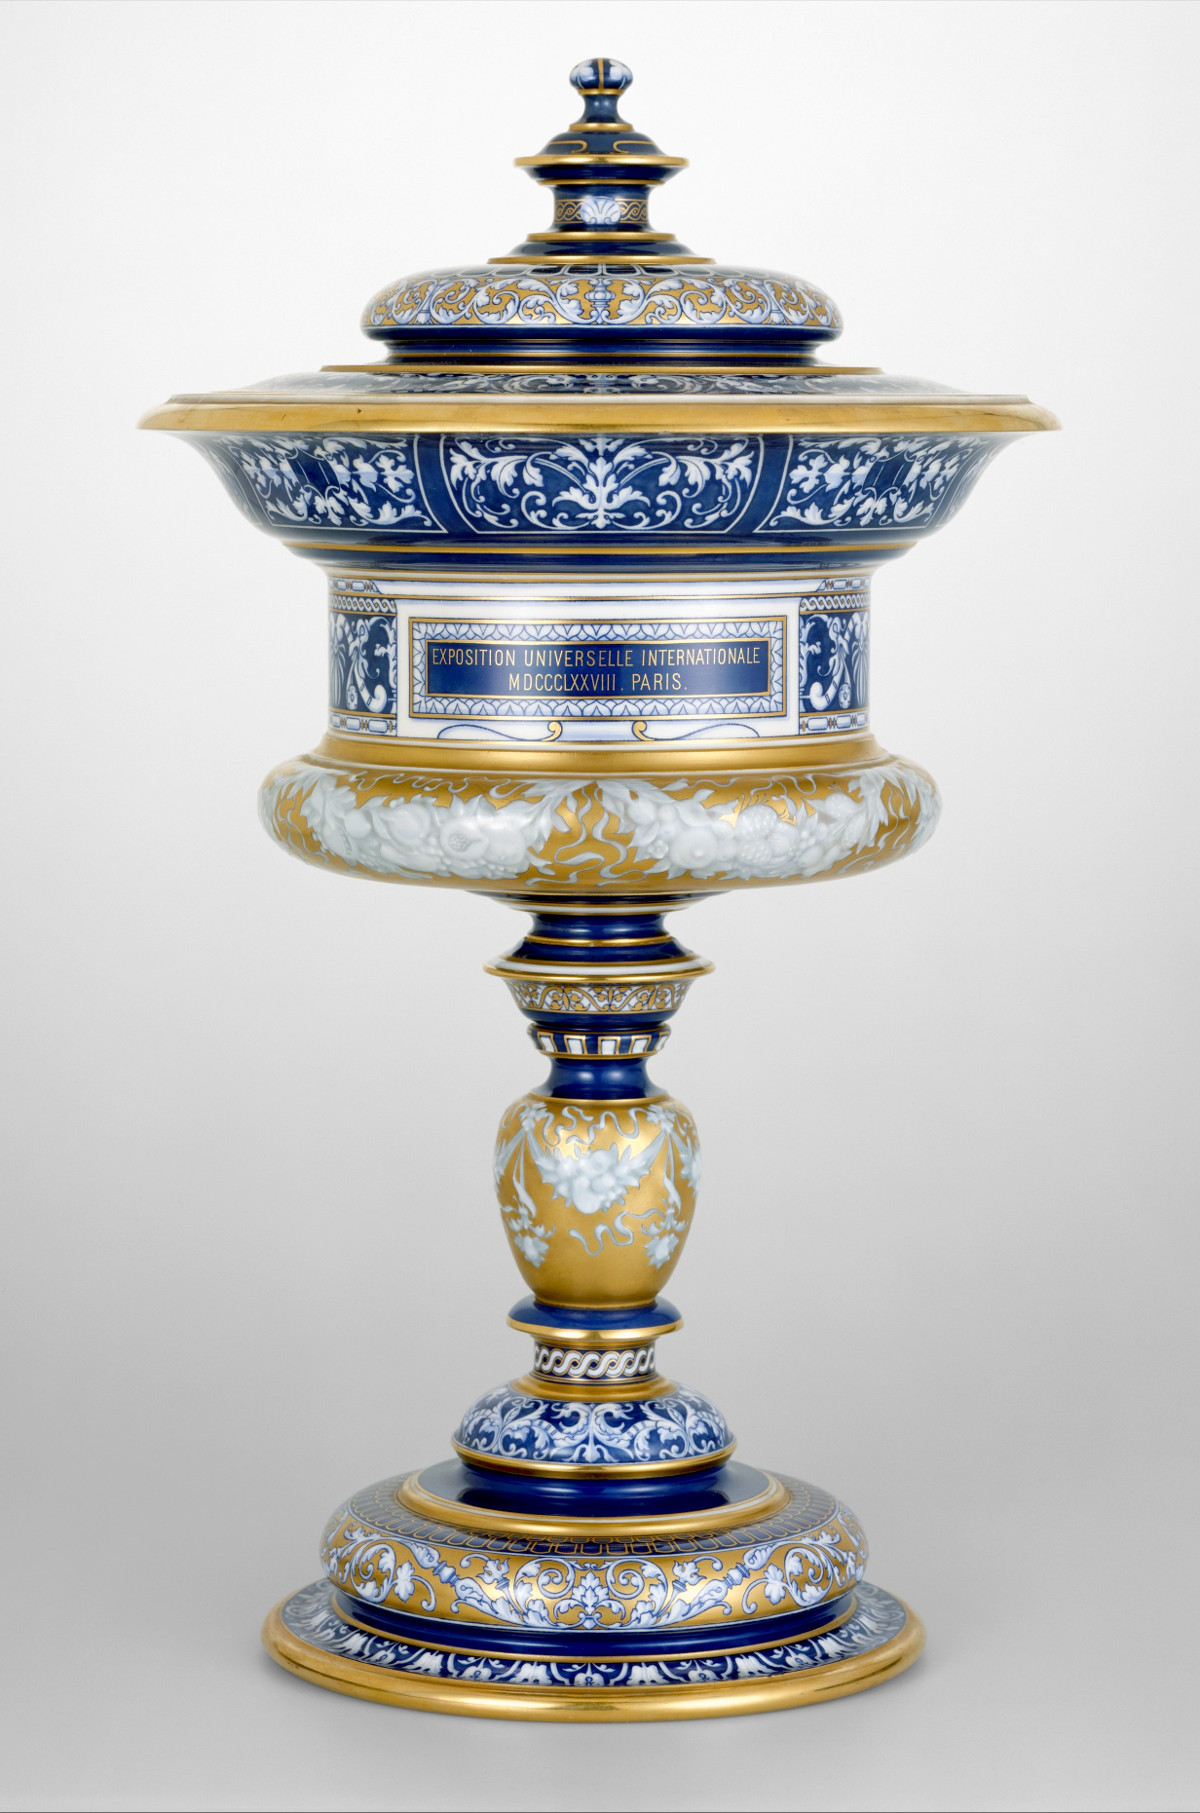 1879 Standing cup with cover. Hard-paste porcelain. metmuseum